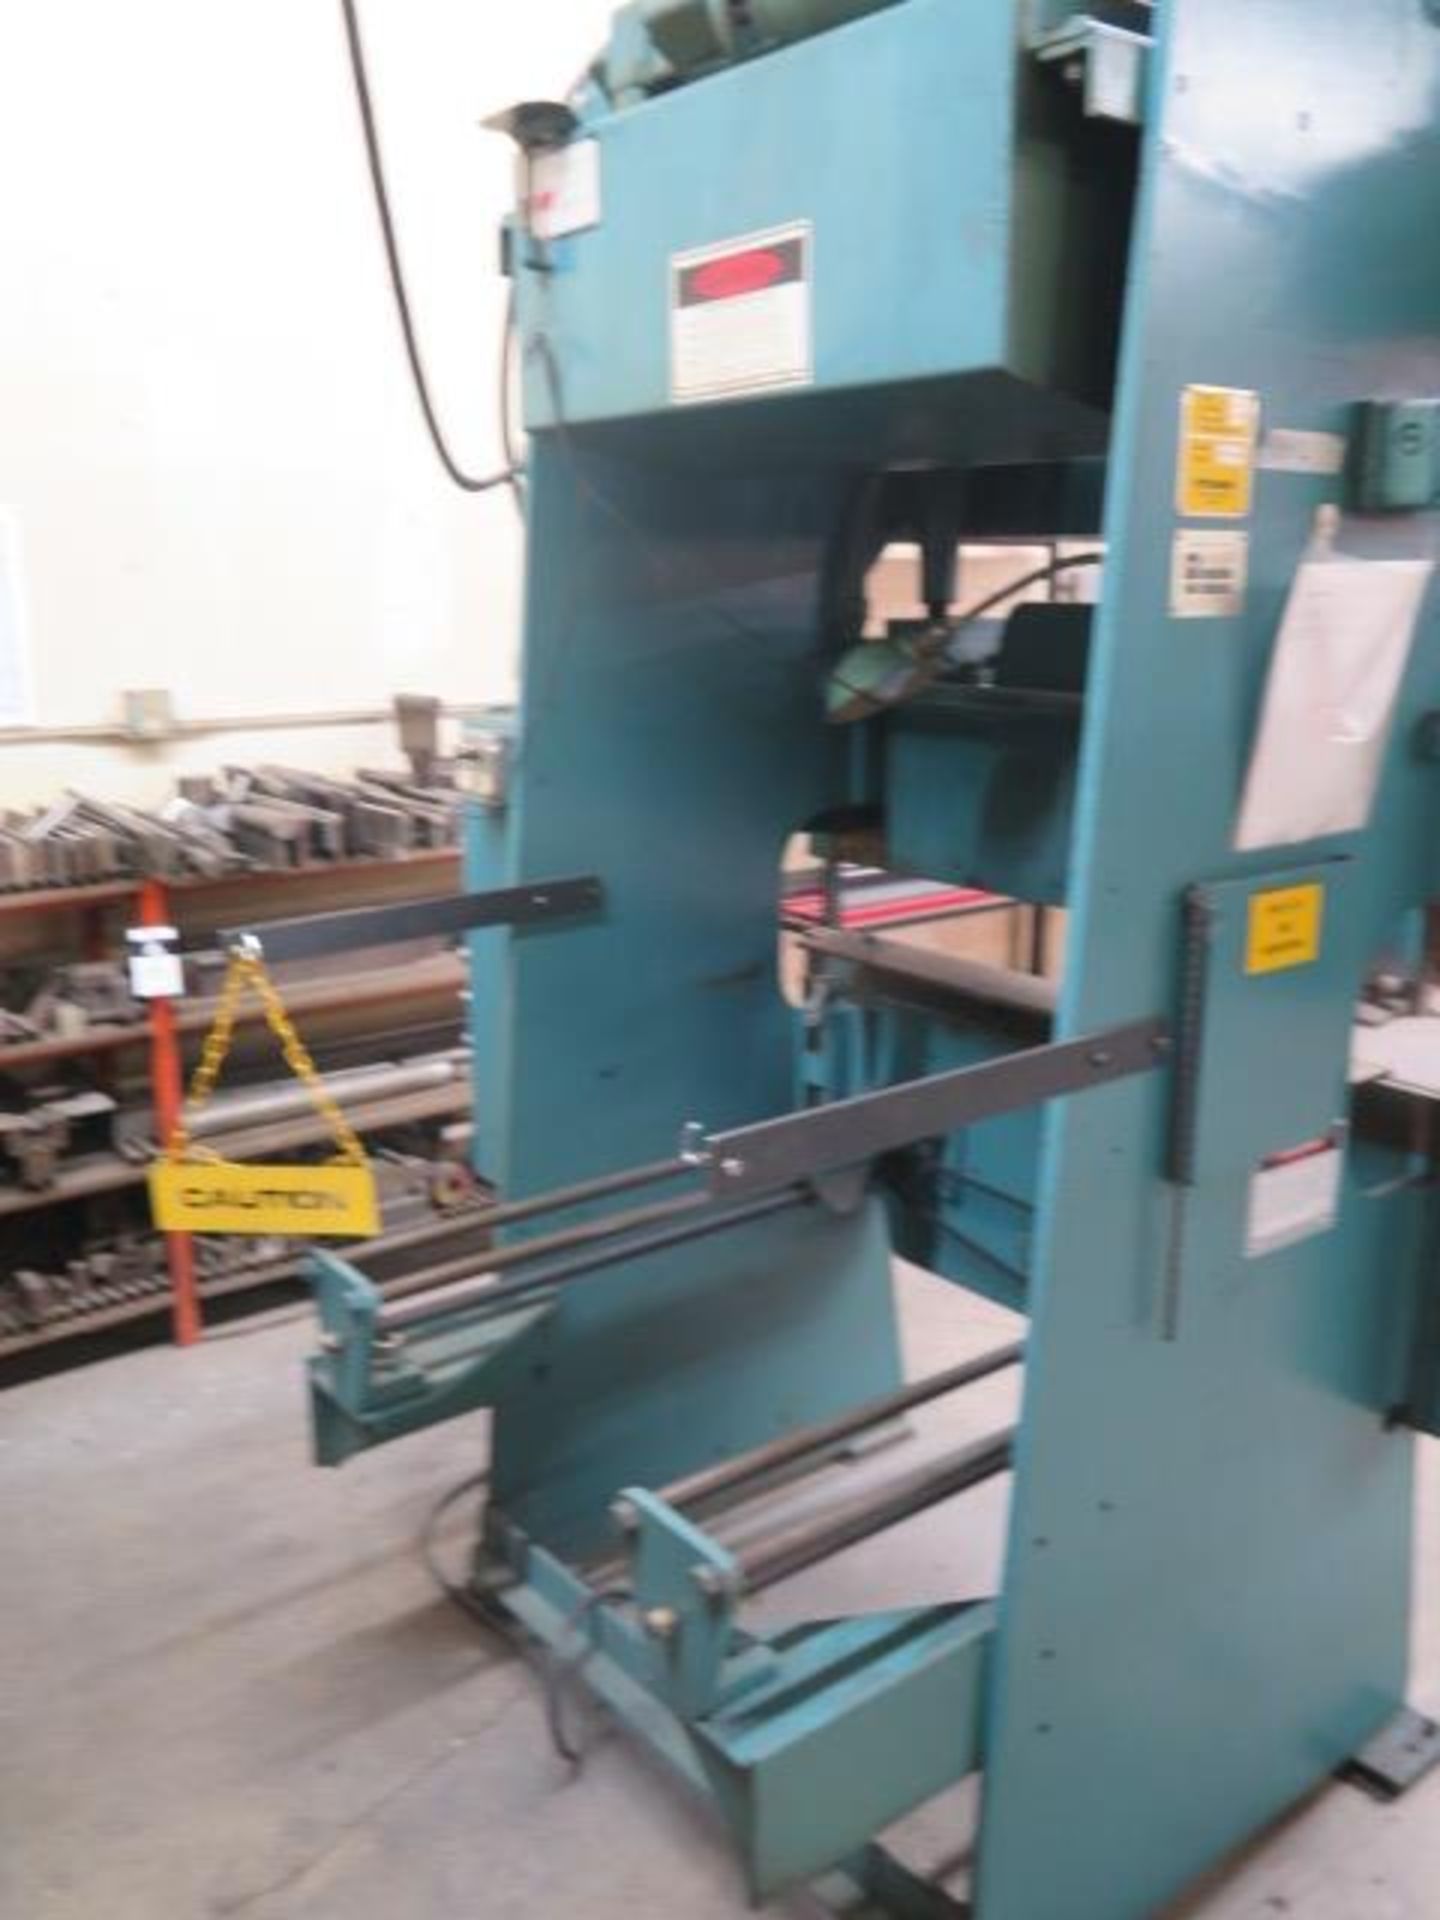 Wysong H-2052 20 Ton x 52” Press Brake s/n HPB12-216 w/ Manual Back Gage, 2 ½” Stroke, SOLD AS IS - Image 8 of 14